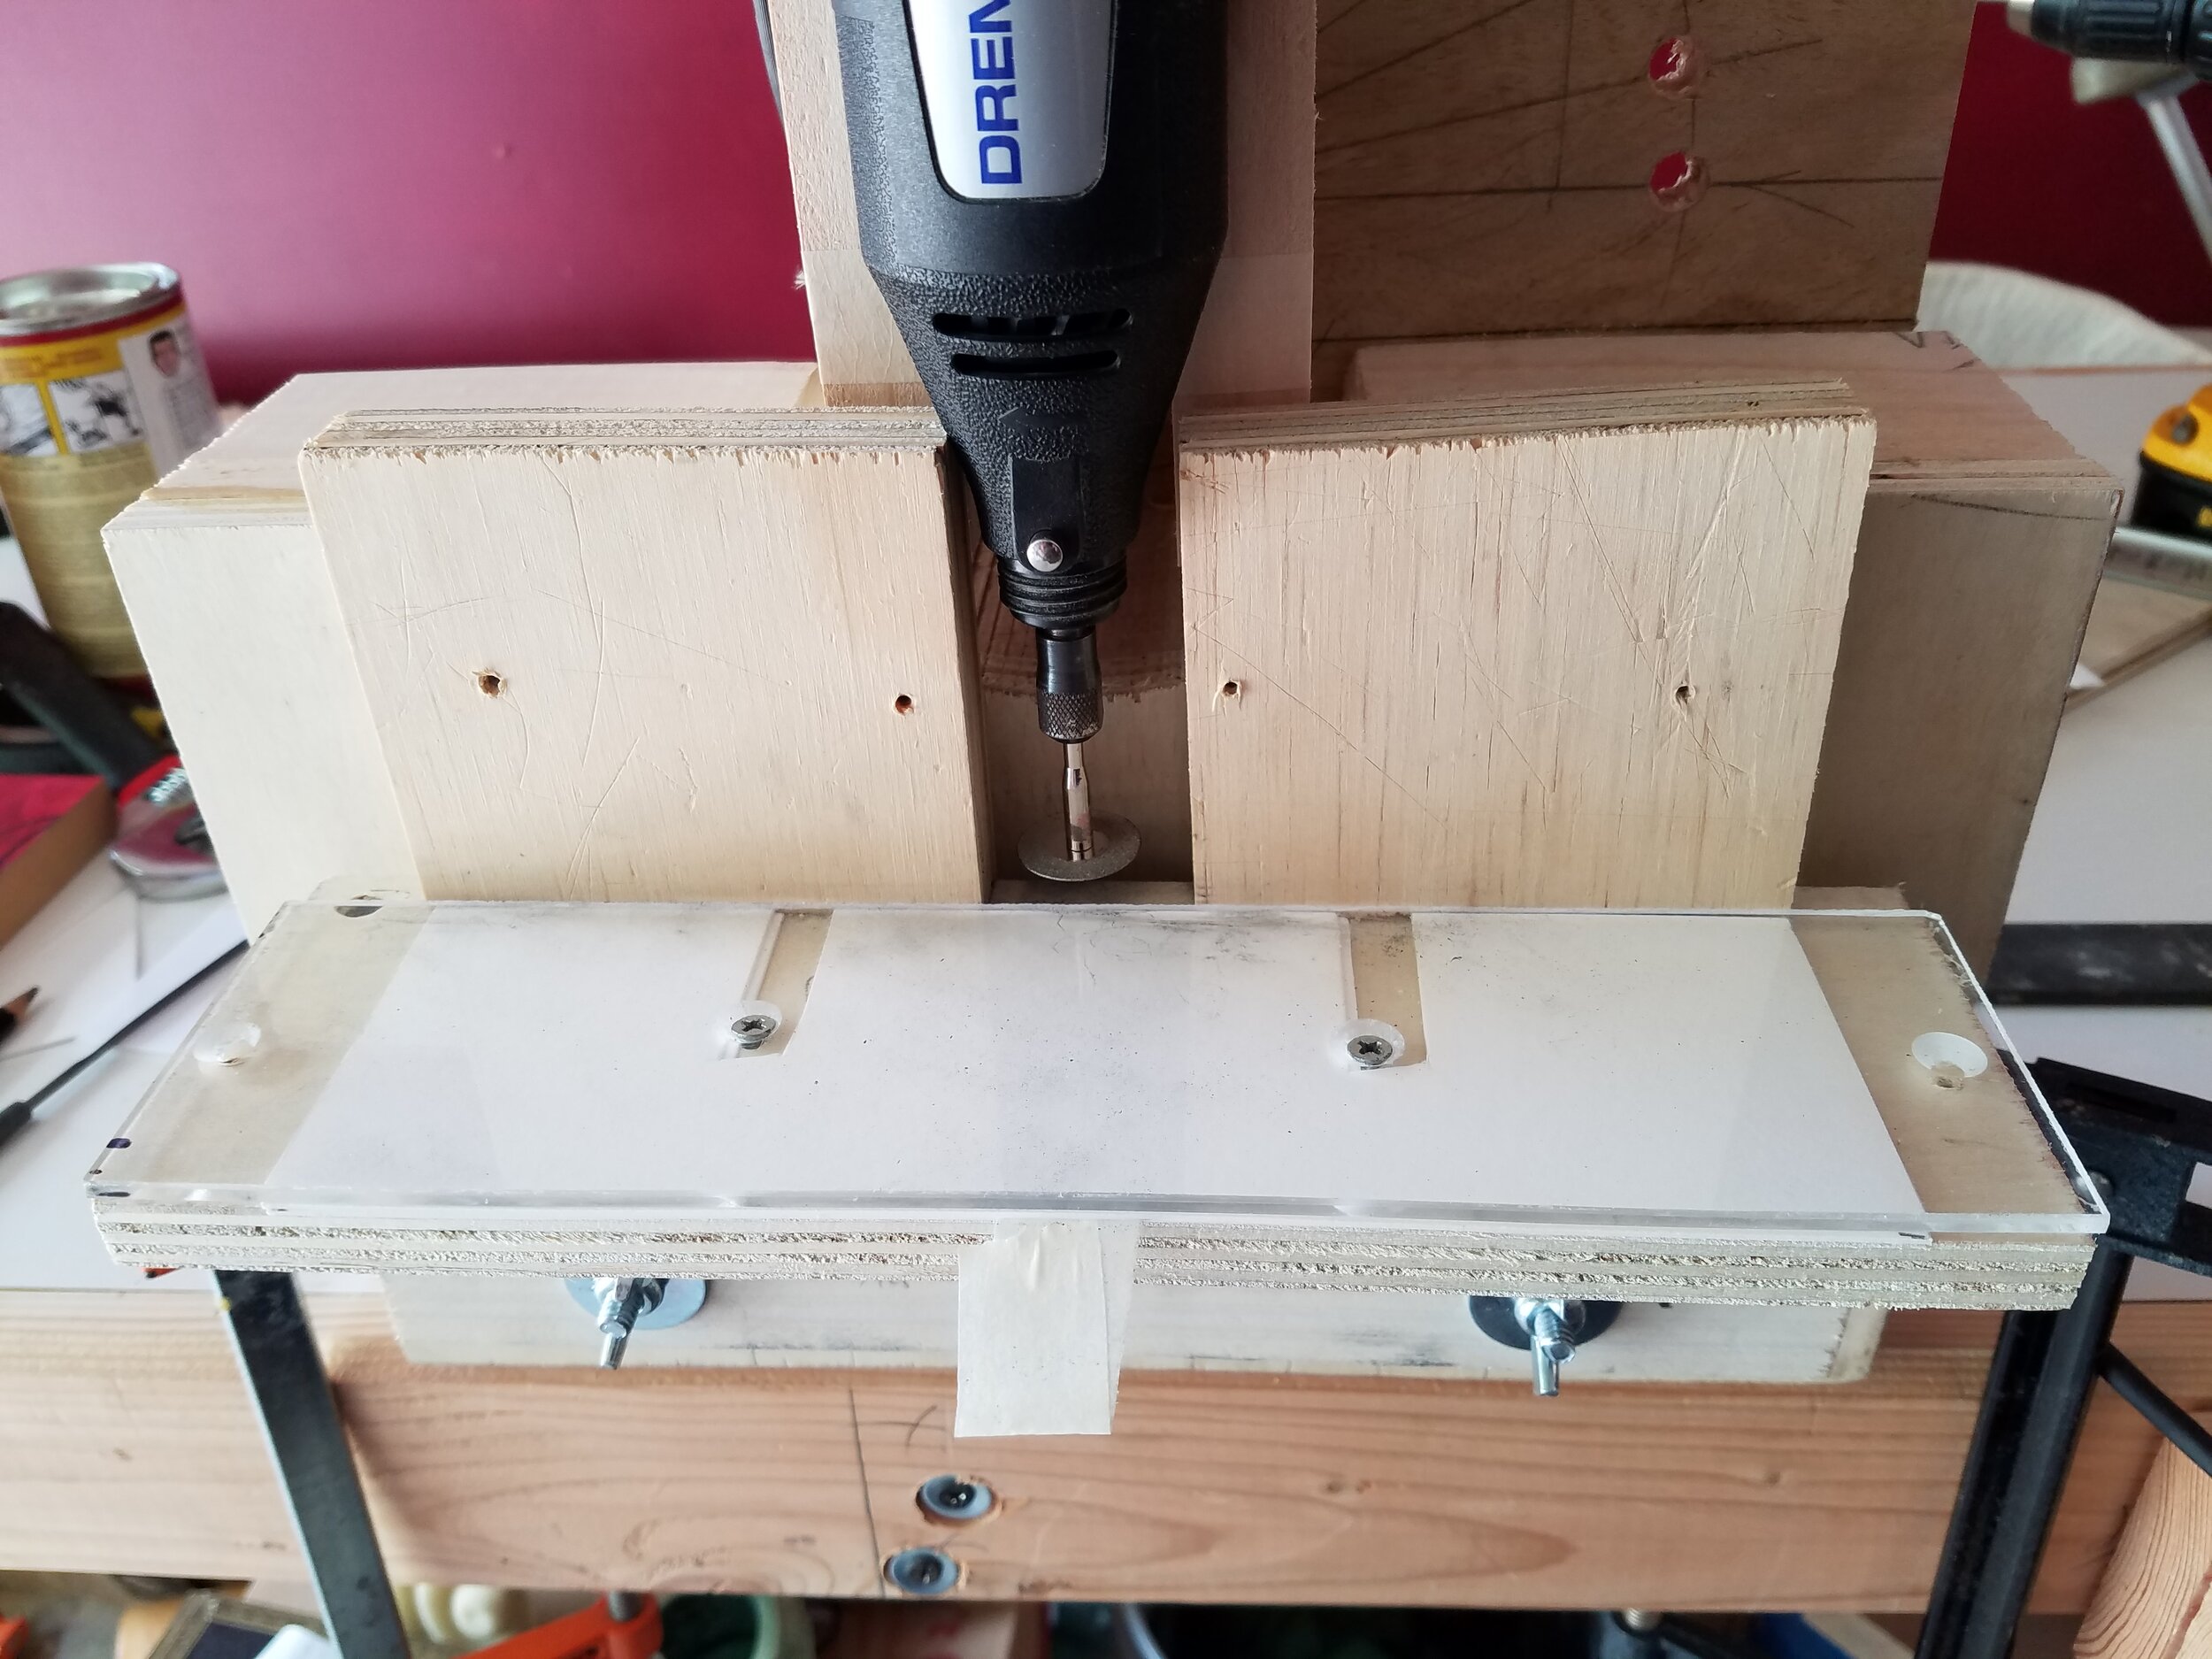  This rotary tool jig allowed me to present the metal graver to a diamond cutting wheel at a consistent angle. The base could be adjusted to allow consistent spacing between cuts. I built in an option to rotate the dremel in case I needed that in the